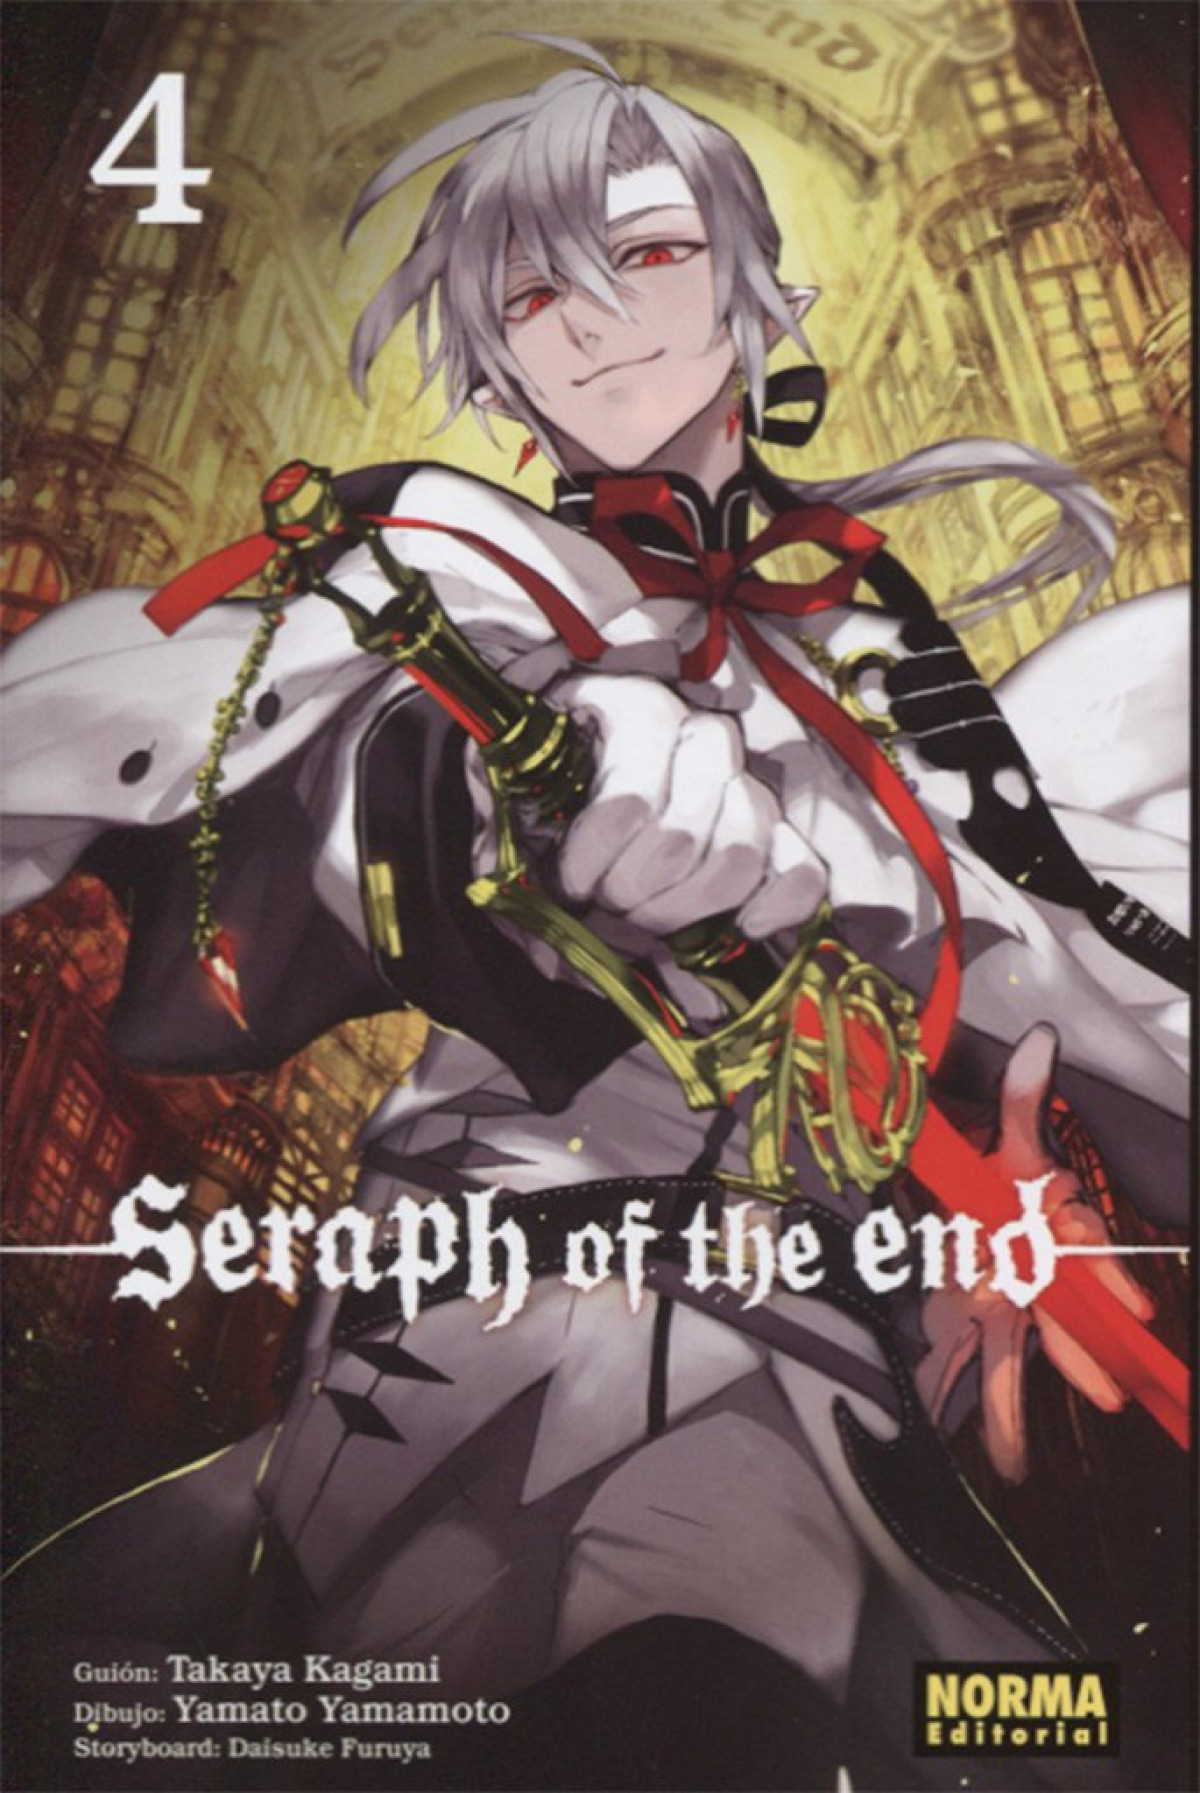 Seraph of the end 4 - Vv.Aa.